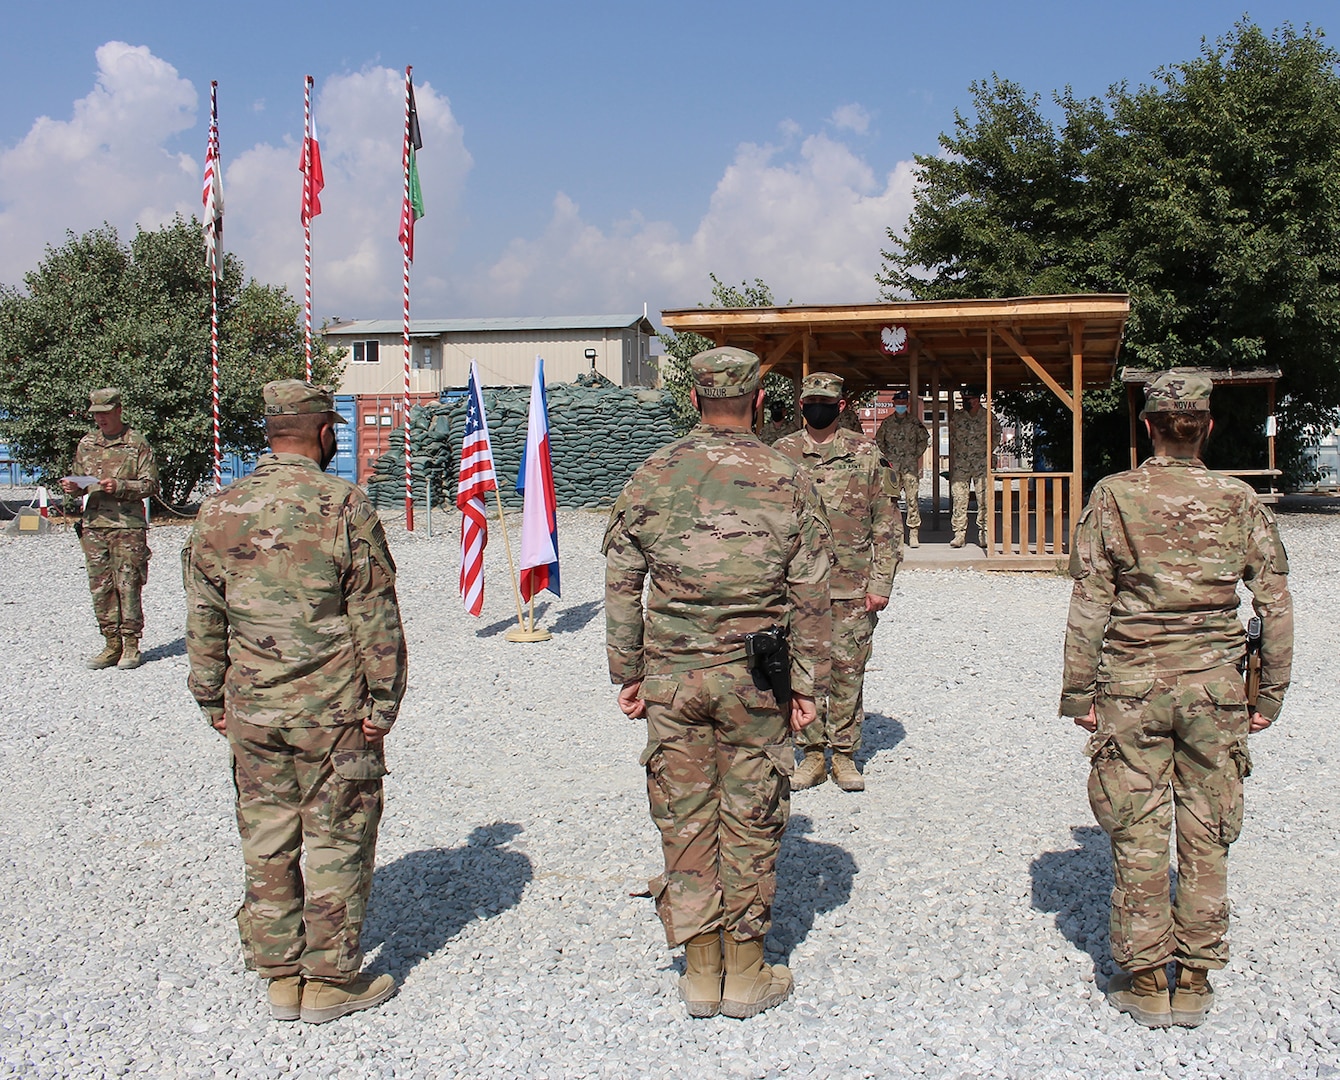 Lt. Col. Jason Osberg, of Champaign, Illinois, Commander, Bilateral Embedded Staff Team A25, addresses Illinois Army National Guard Soldiers during the recent patching ceremony held at the Polish Military Compound at Bagram Airfield, Afghanistan.